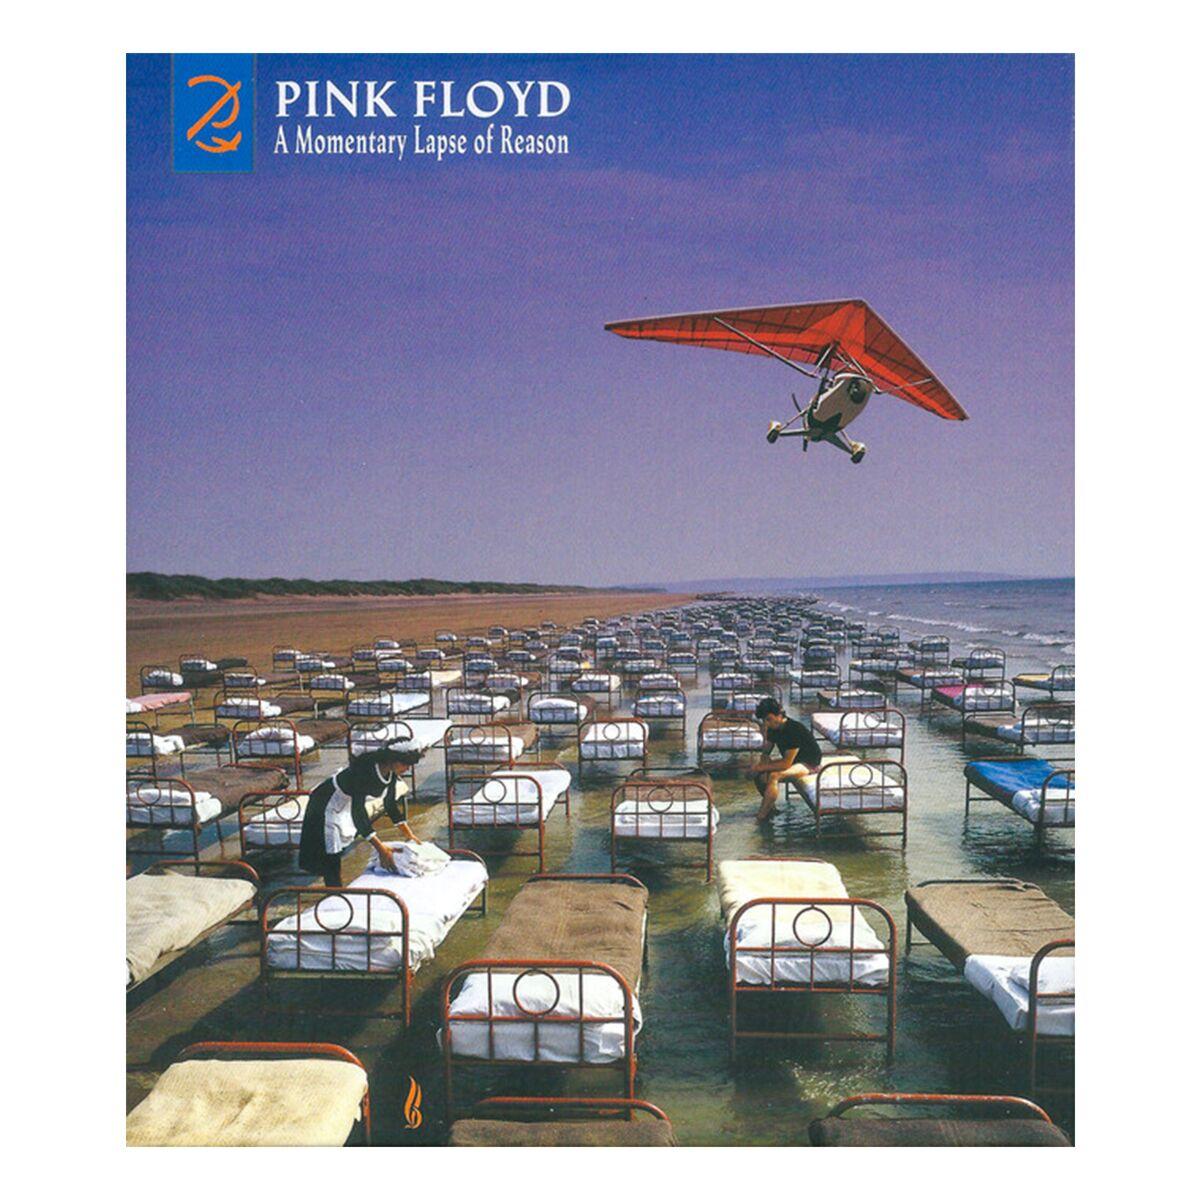 Pink Floyd A Momentary Lapse Of Reason (Remixed and Updated) (Album, Deluxe Edition CD+DVD) 2CD